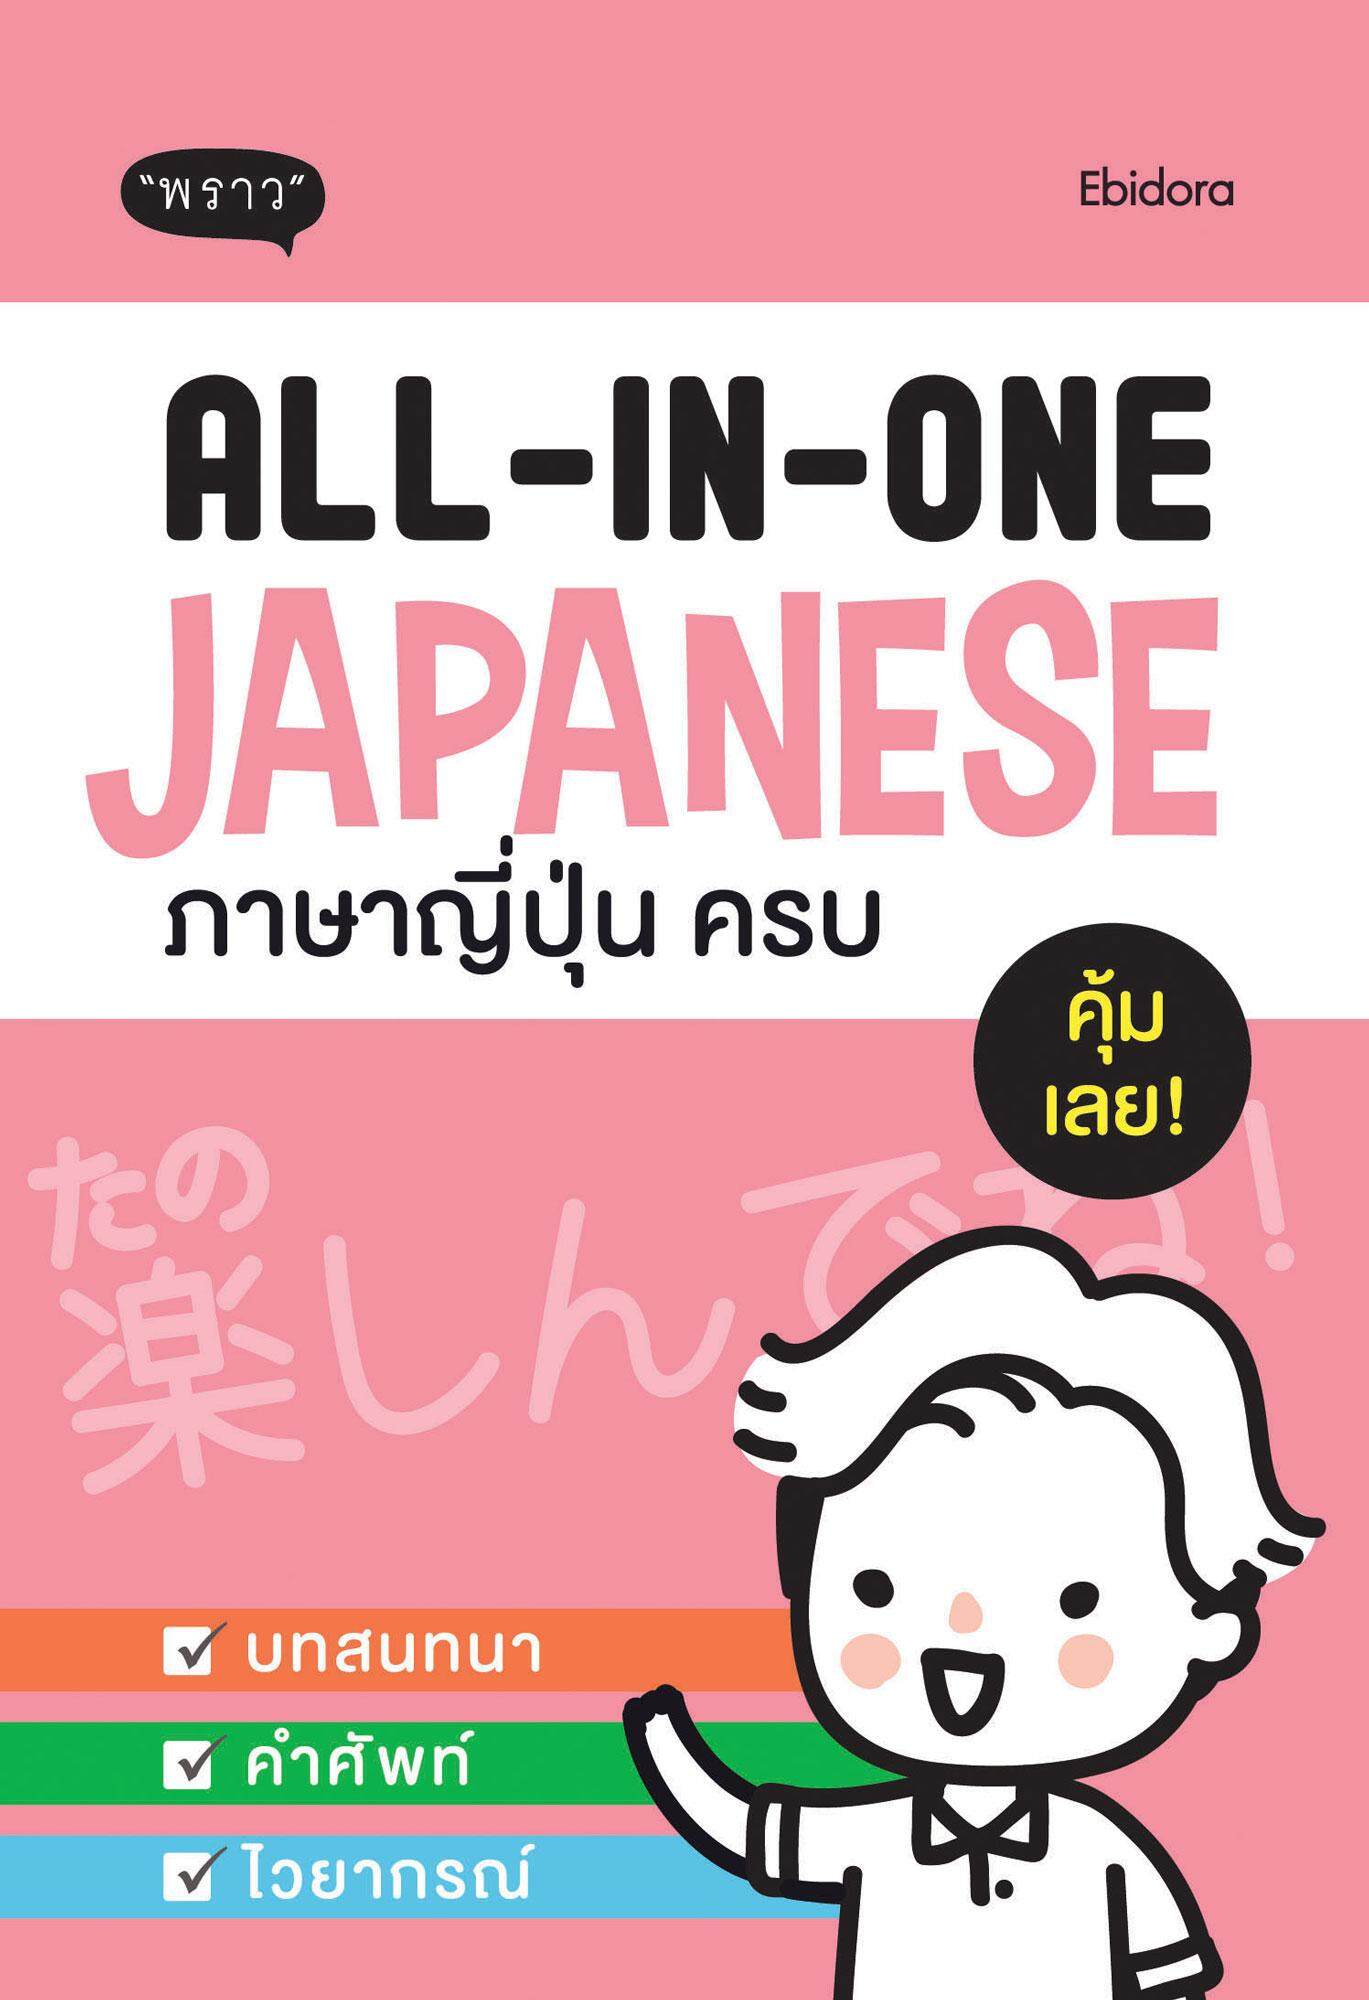 All-in-one Japanese ภาษาญี่ปุ่นครบ